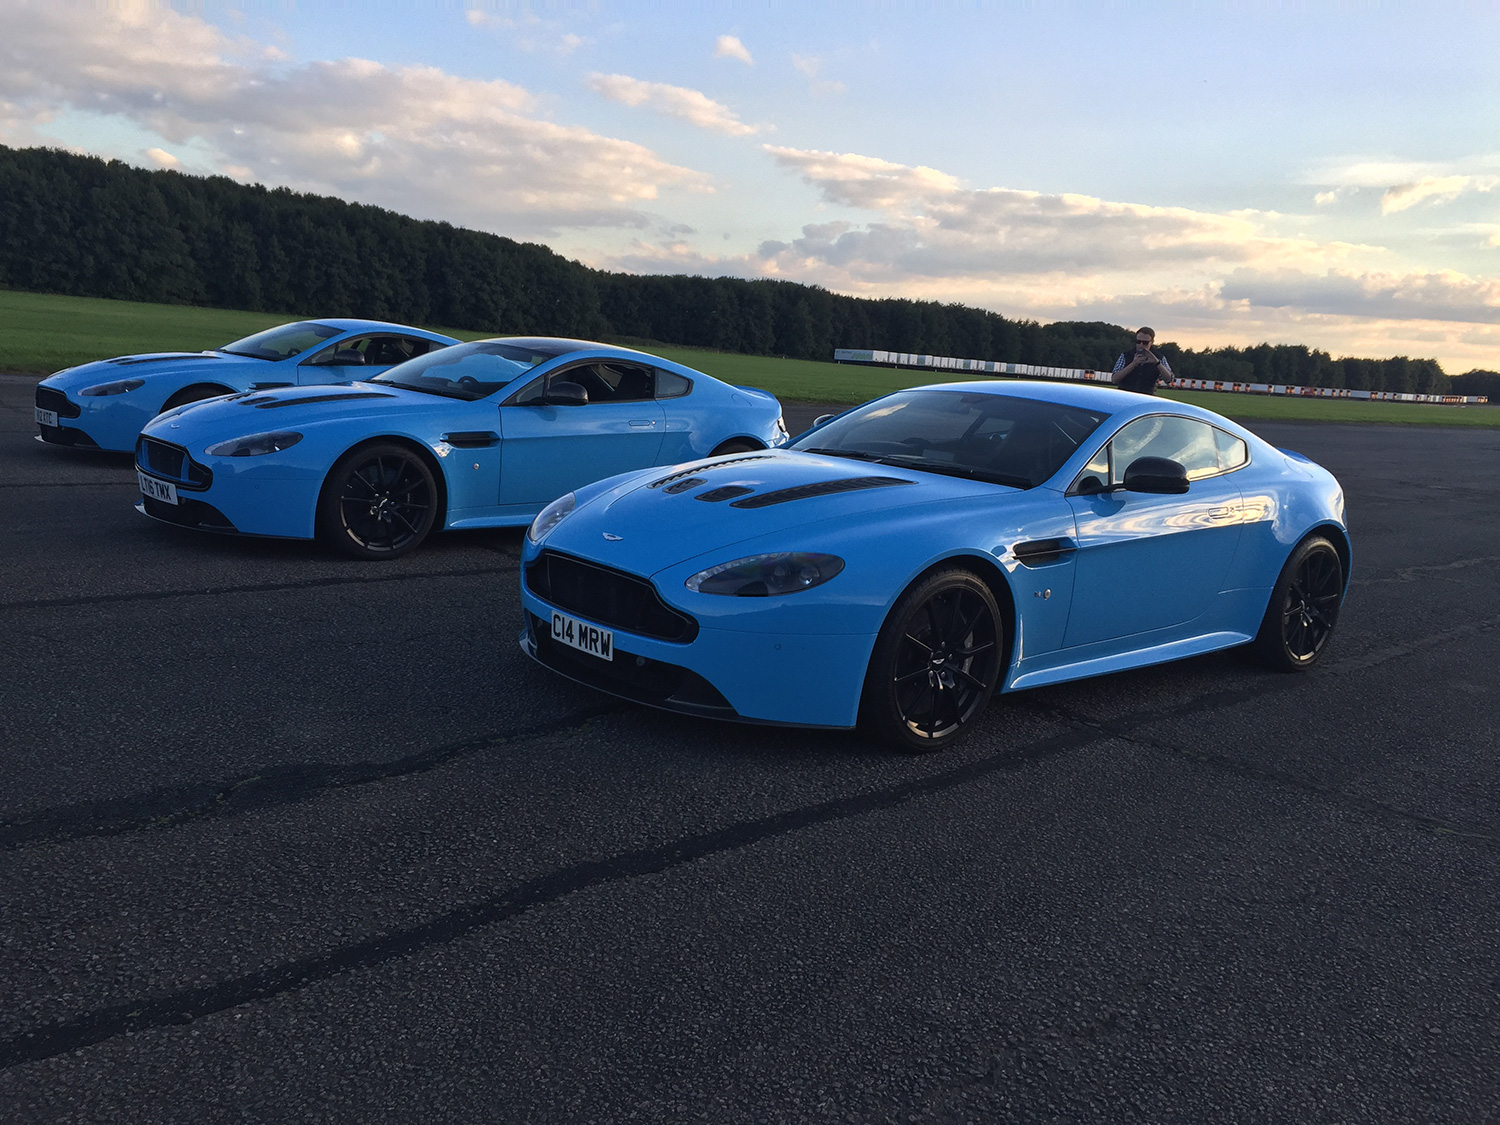 So what have you done with your Aston today? - Page 278 - Aston Martin - PistonHeads